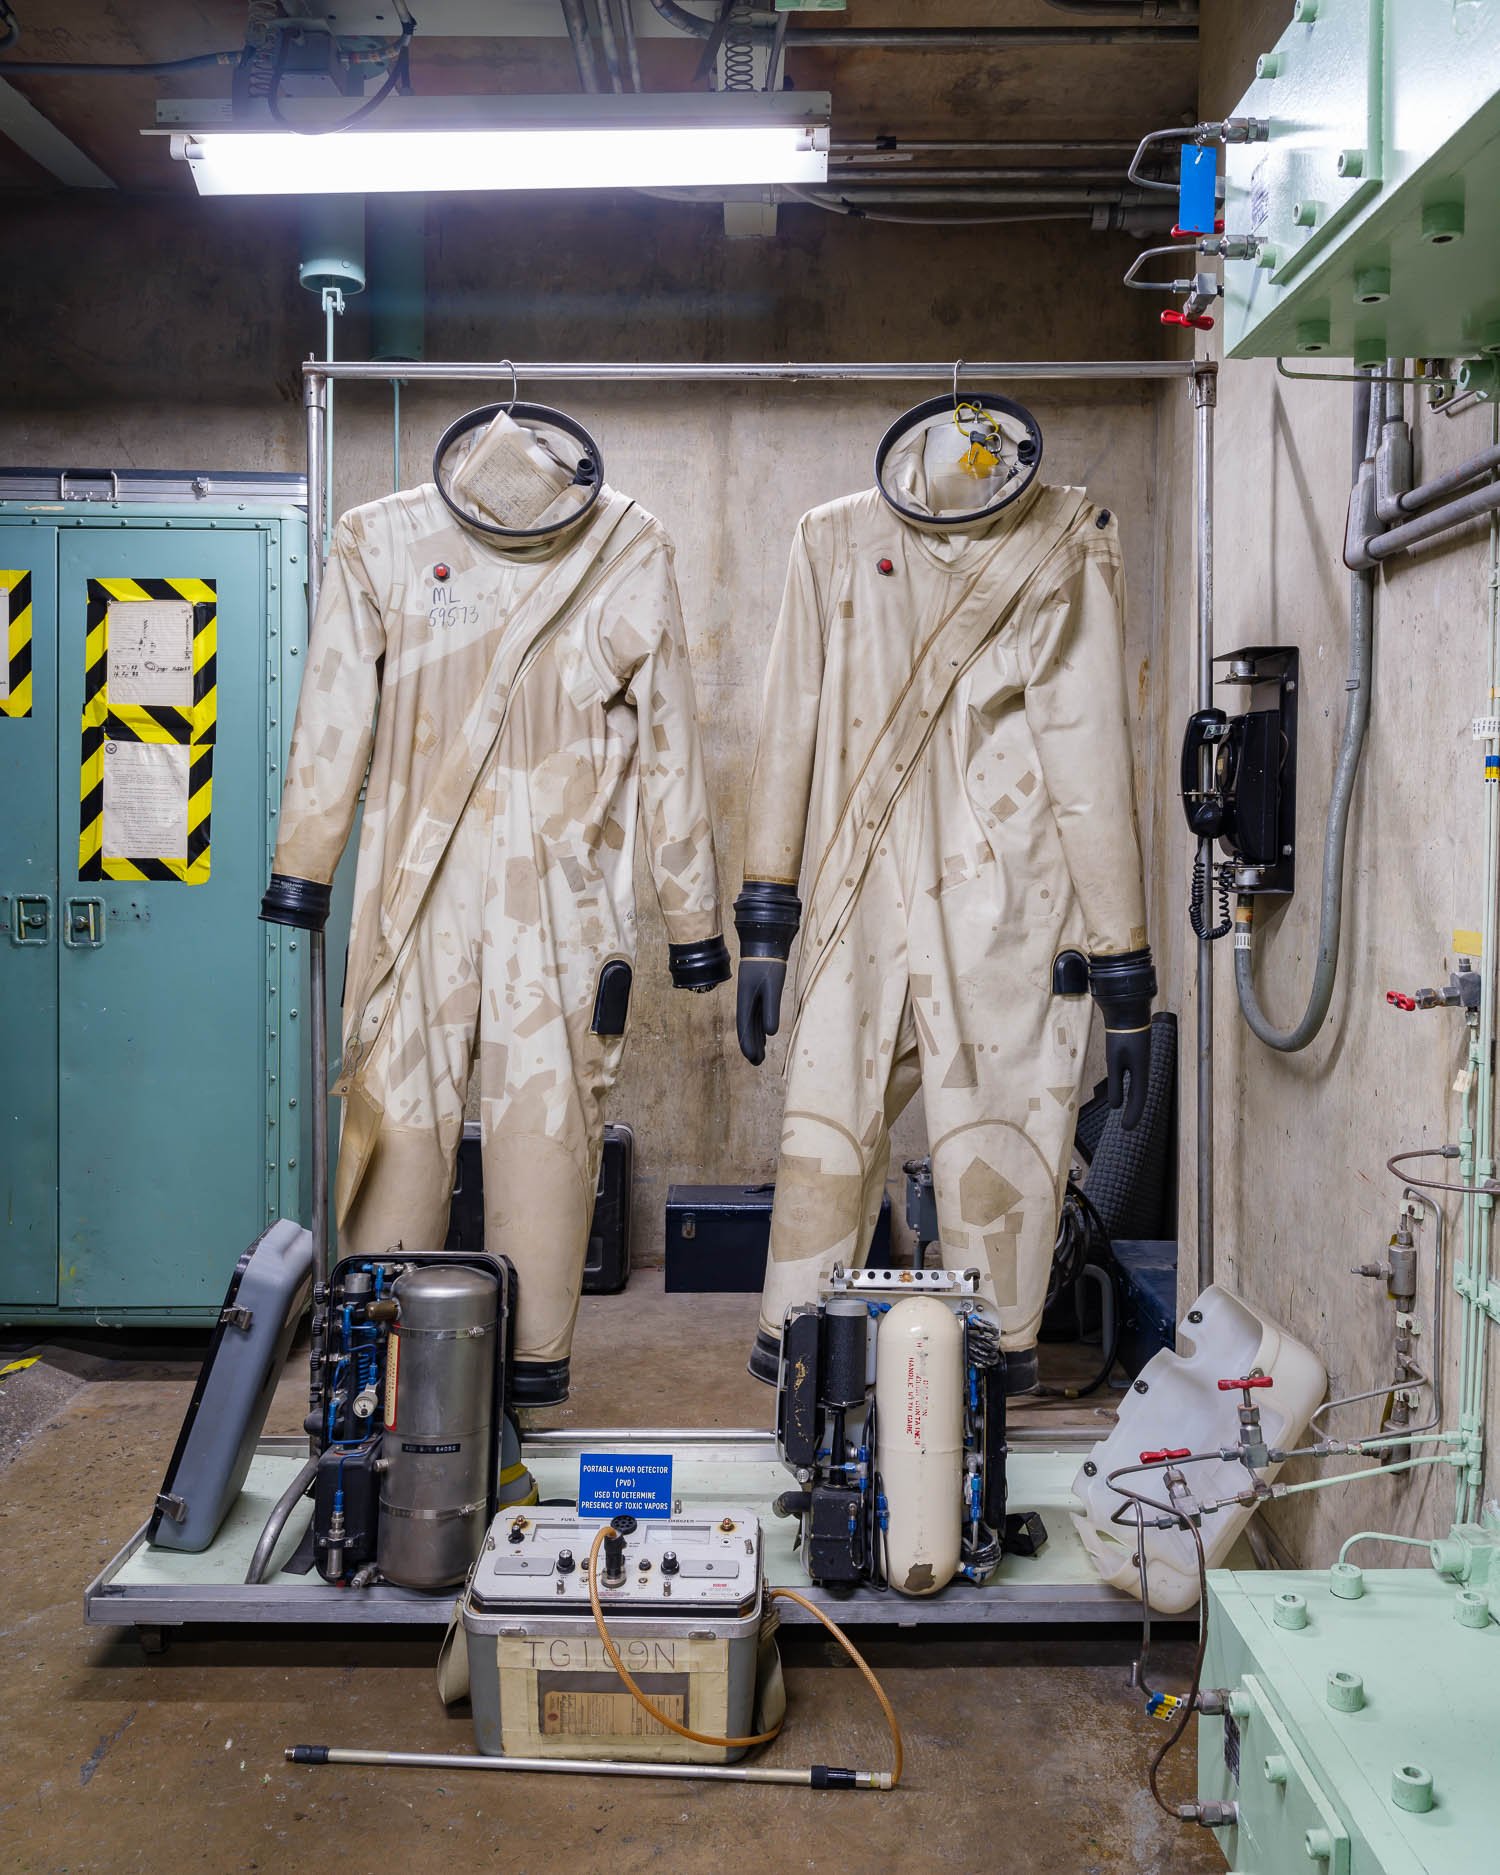  Rocket Fuel Handler's Coverall Suits (Refco) at a Titan II Nuclear Missile Silo, Arizona, USA. The fuels and oxidizers used in the rockets were extremely dangerous, and technicians spent a year just learning how to work in these suits. 